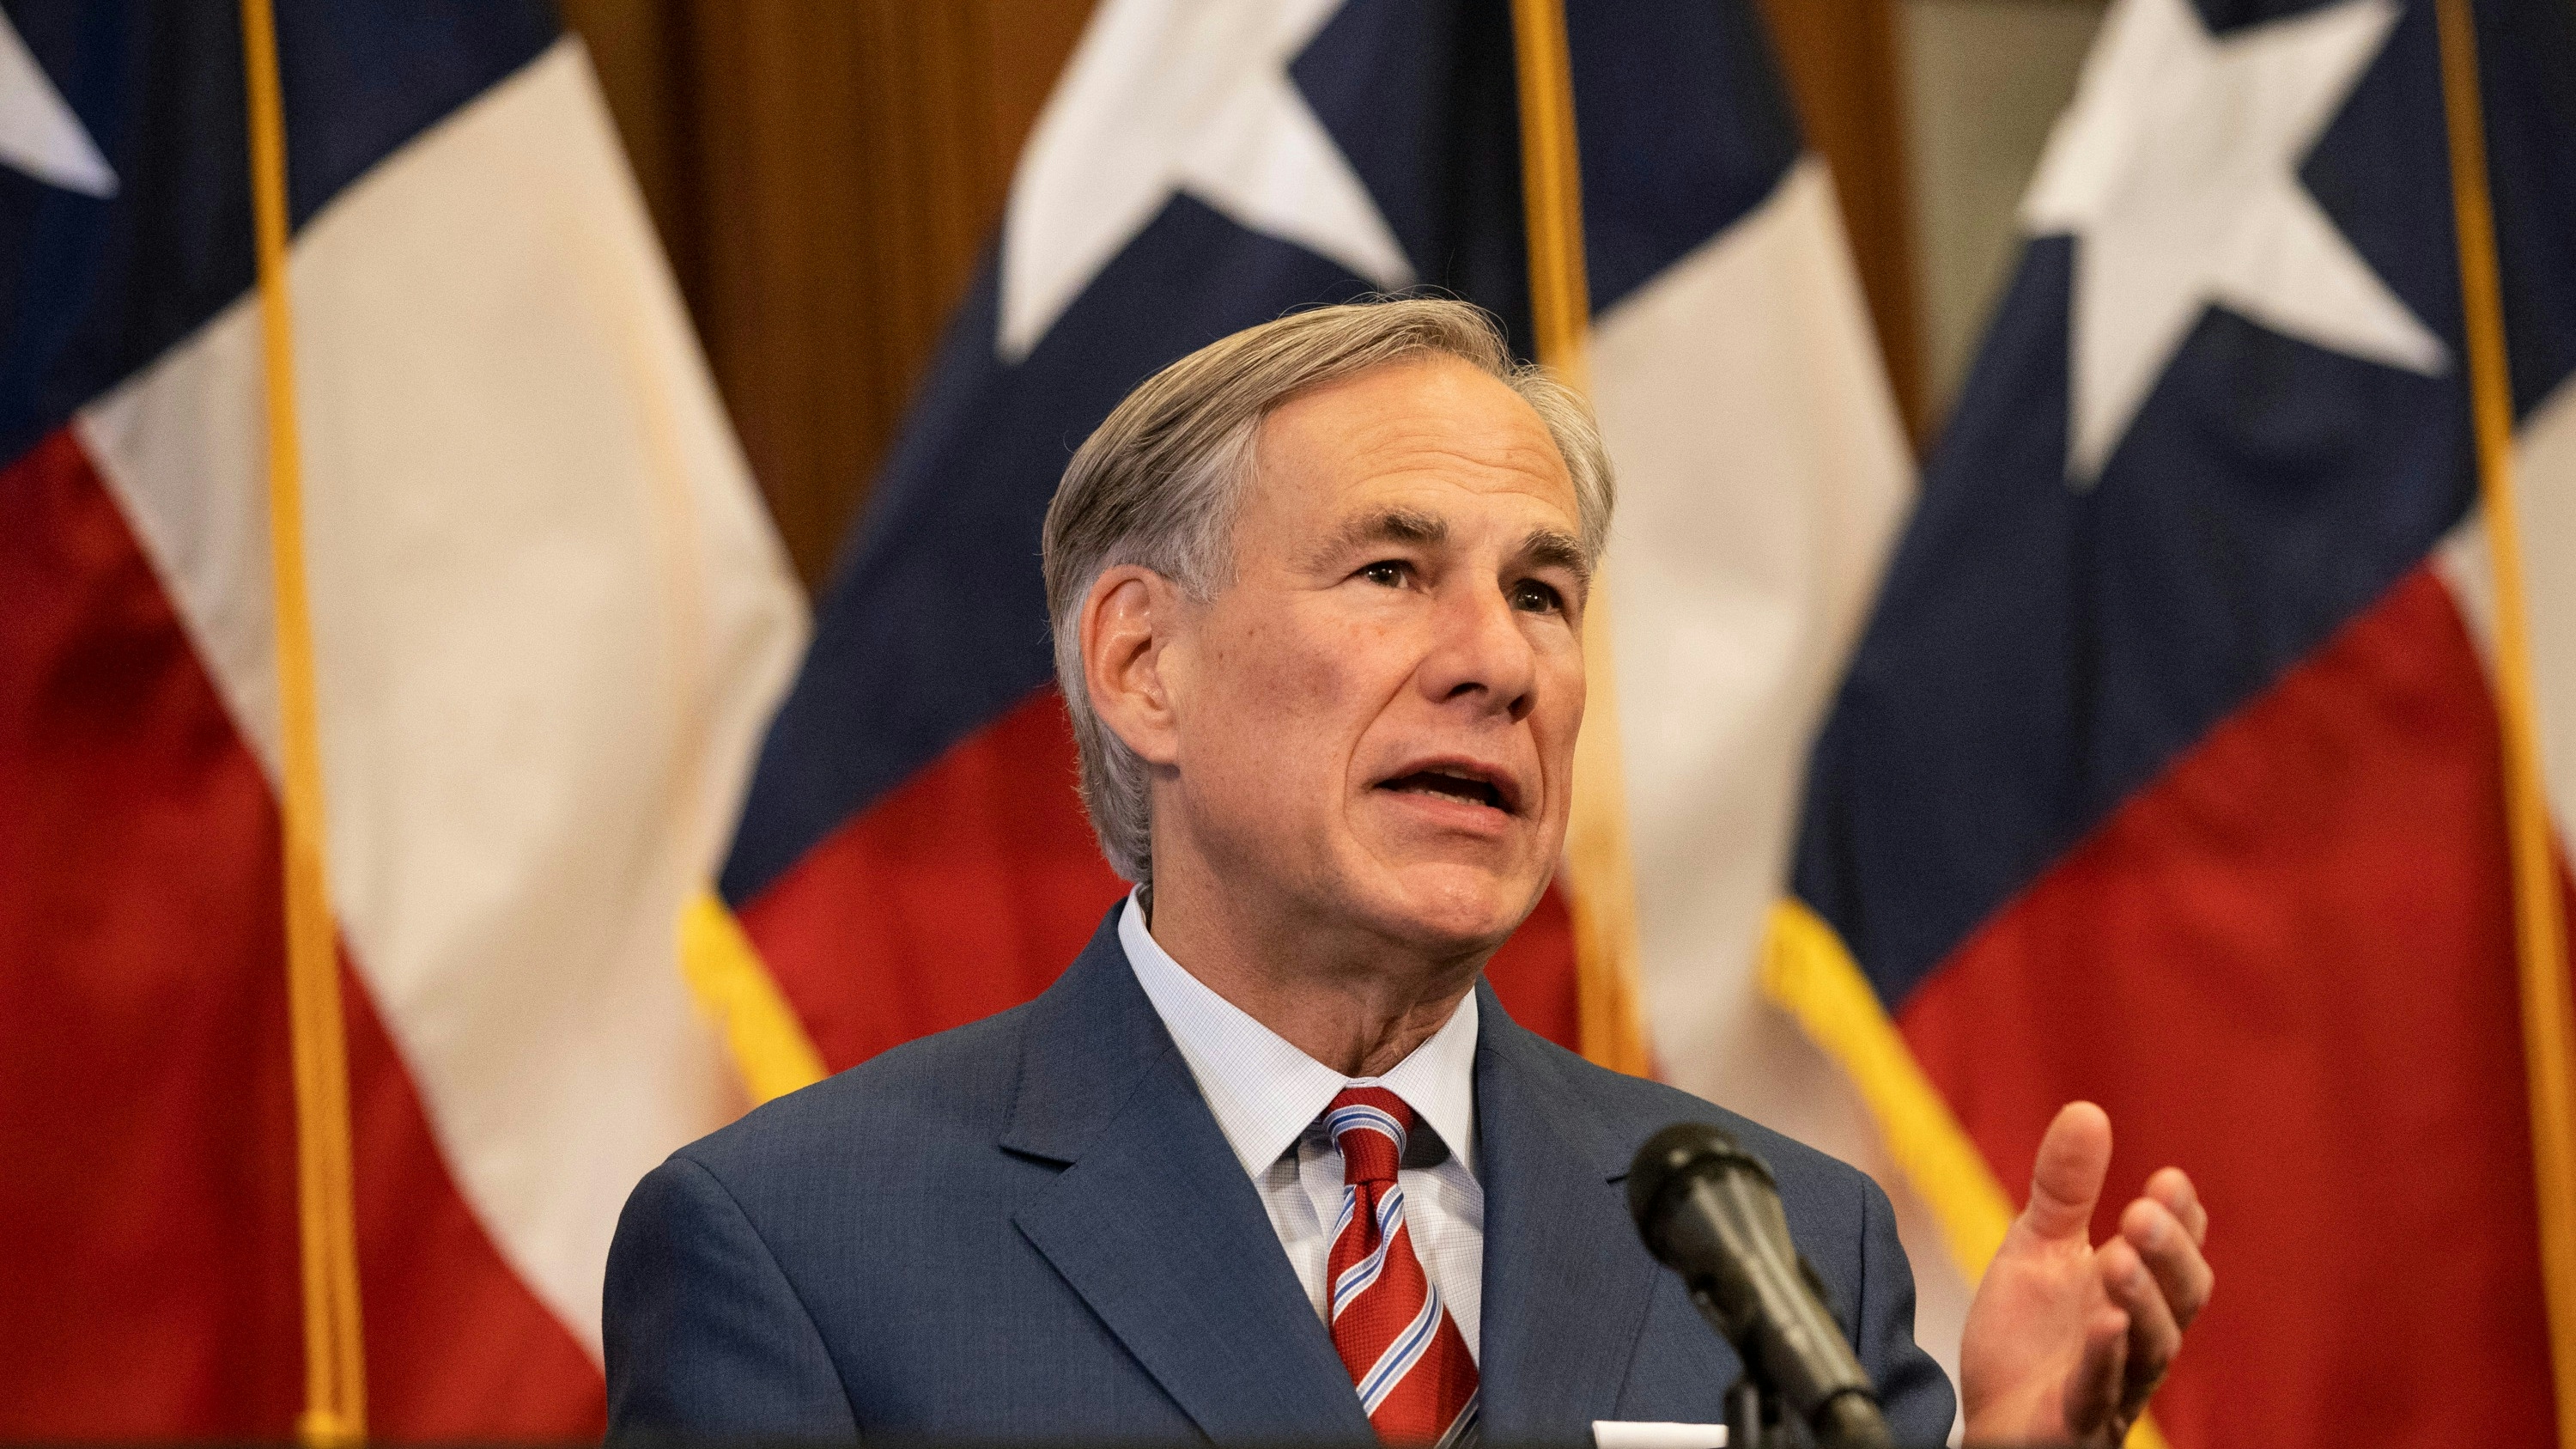 Texas Governor Greg Abbott announces the reopening of more Texas businesses during the COVID-19 pandemic at a press conference at the Texas State Capitol in Austin on Monday, May 18, 2020.